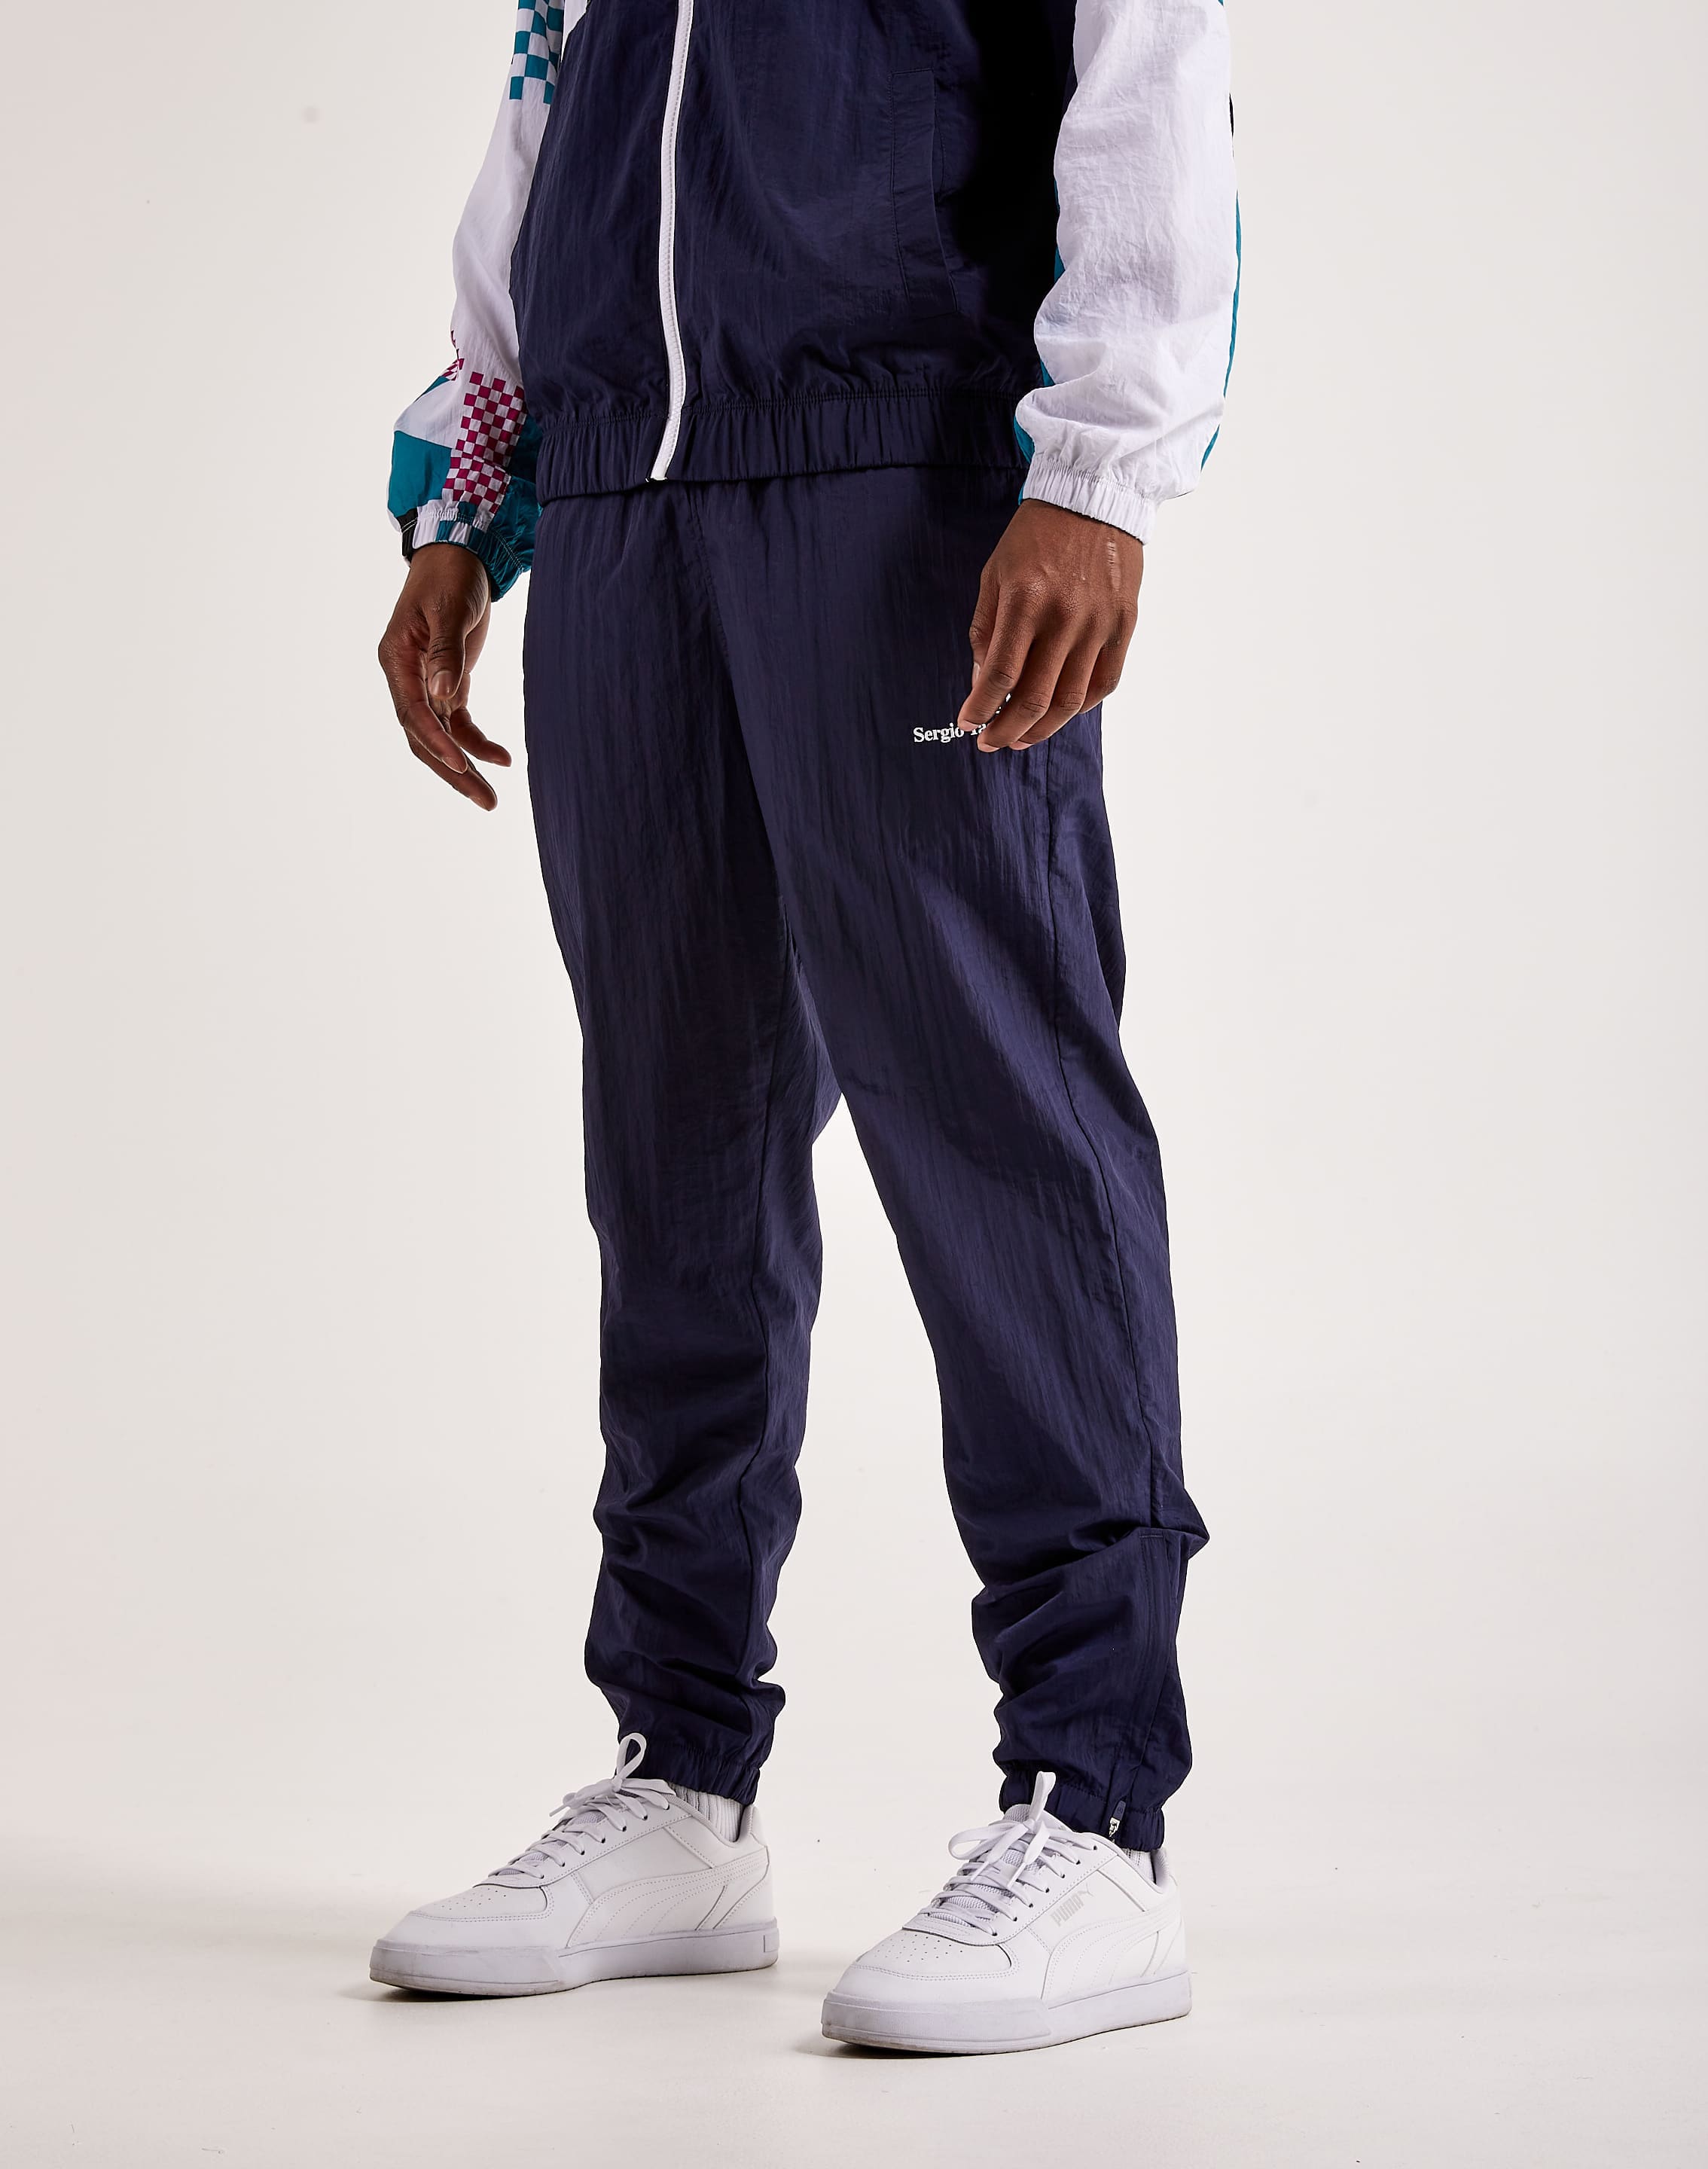 Sergio Tacchini Griante Track Pants – DTLR